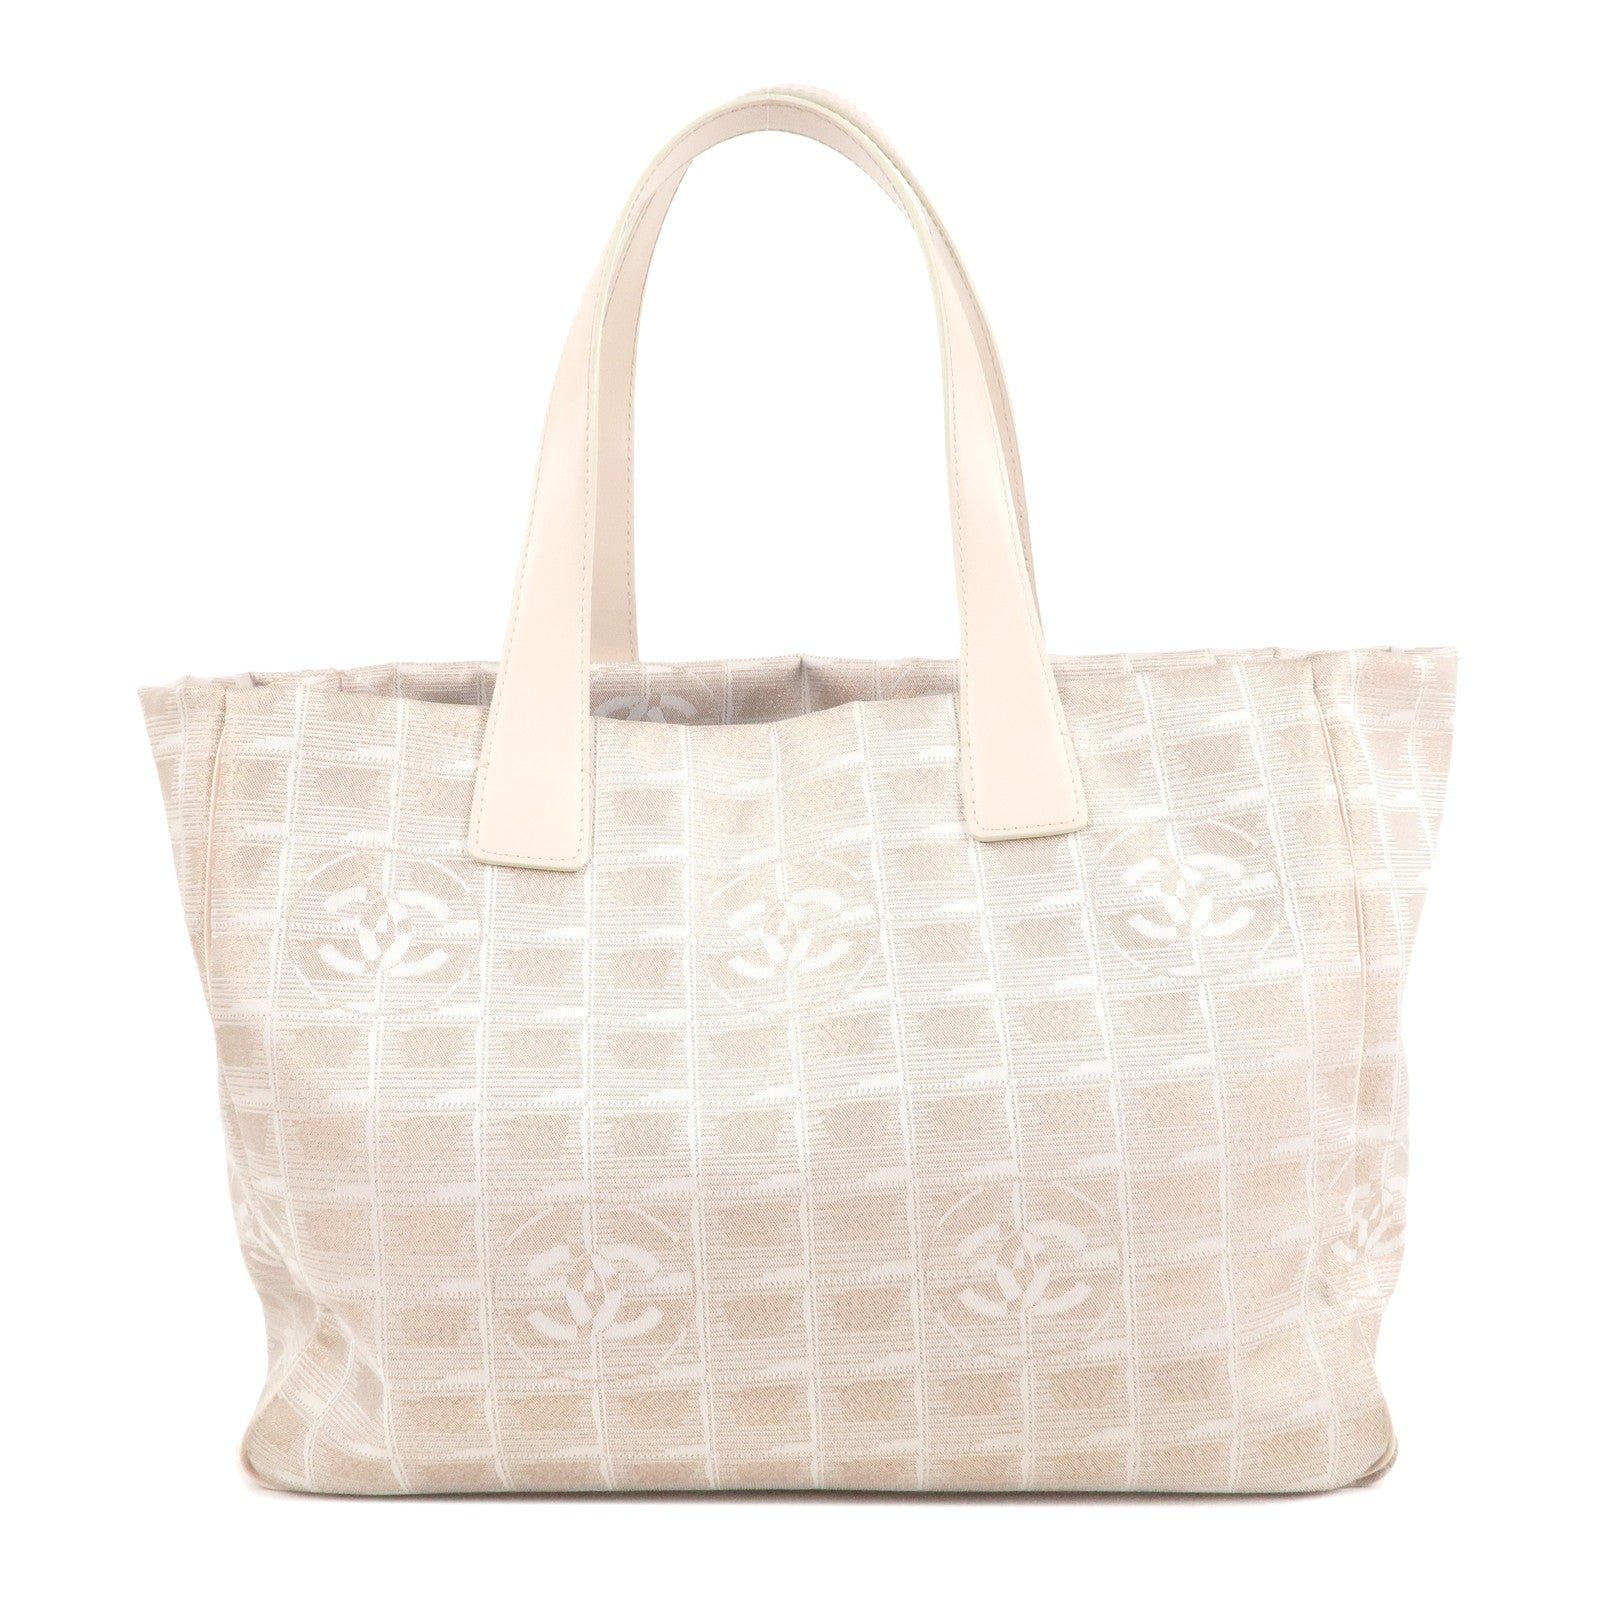 CHANEL-New-Travel-Line-Nylon-Jacquard-Leather-Tote-Bag-A15991